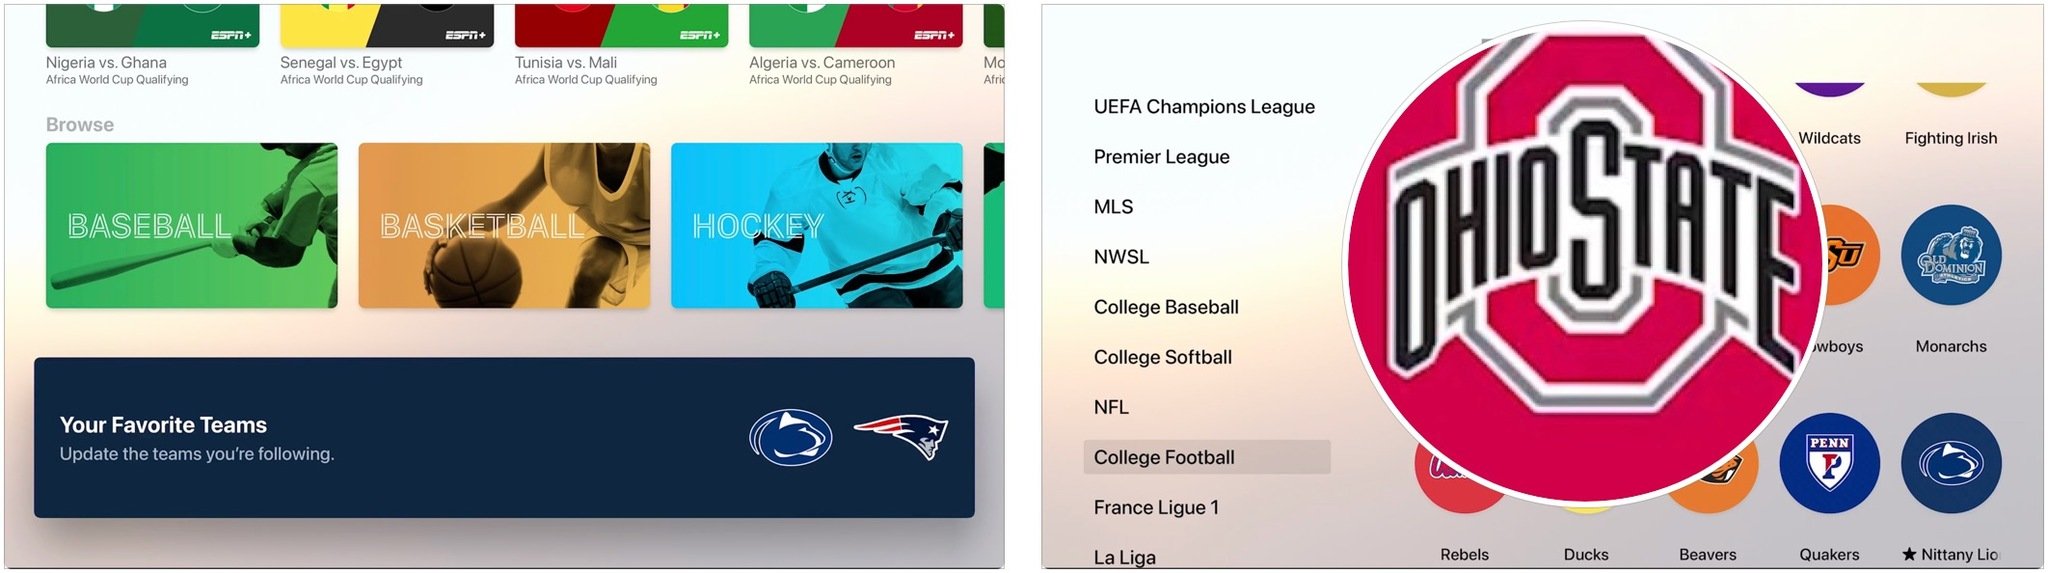 To set up the TV app for your favorite teams, select Your Favorite Teams banner, then choose from the available sports, and select the team. Repeat to add more teams to your list.